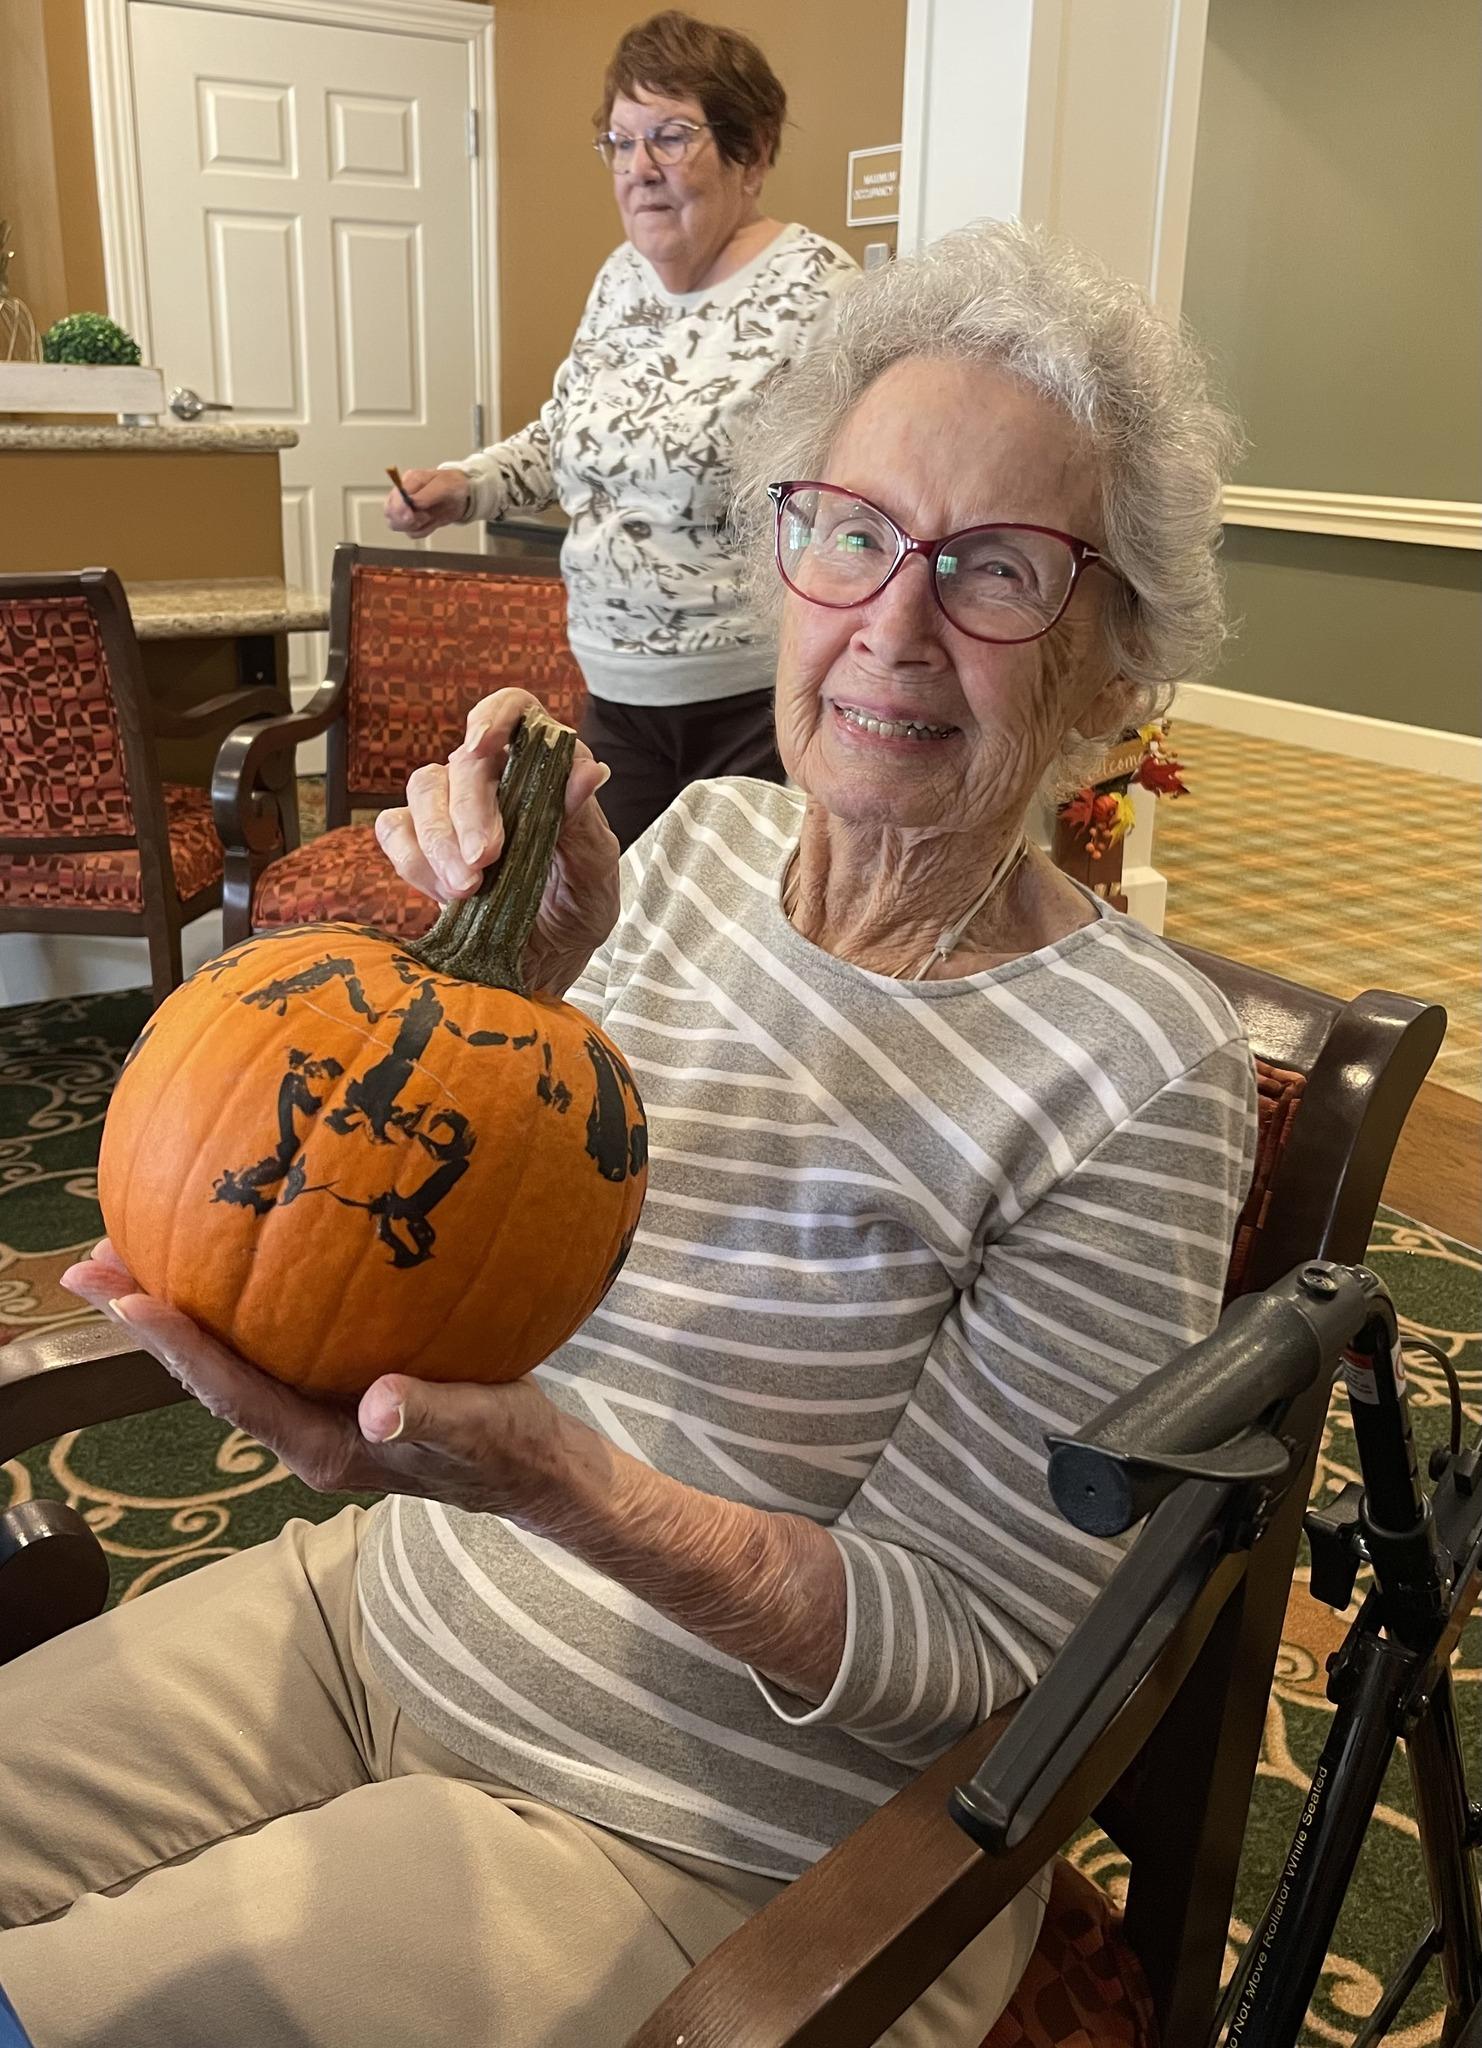 "Woman with glasses smiling, holding a pumpkin with a painted face, seated indoors.